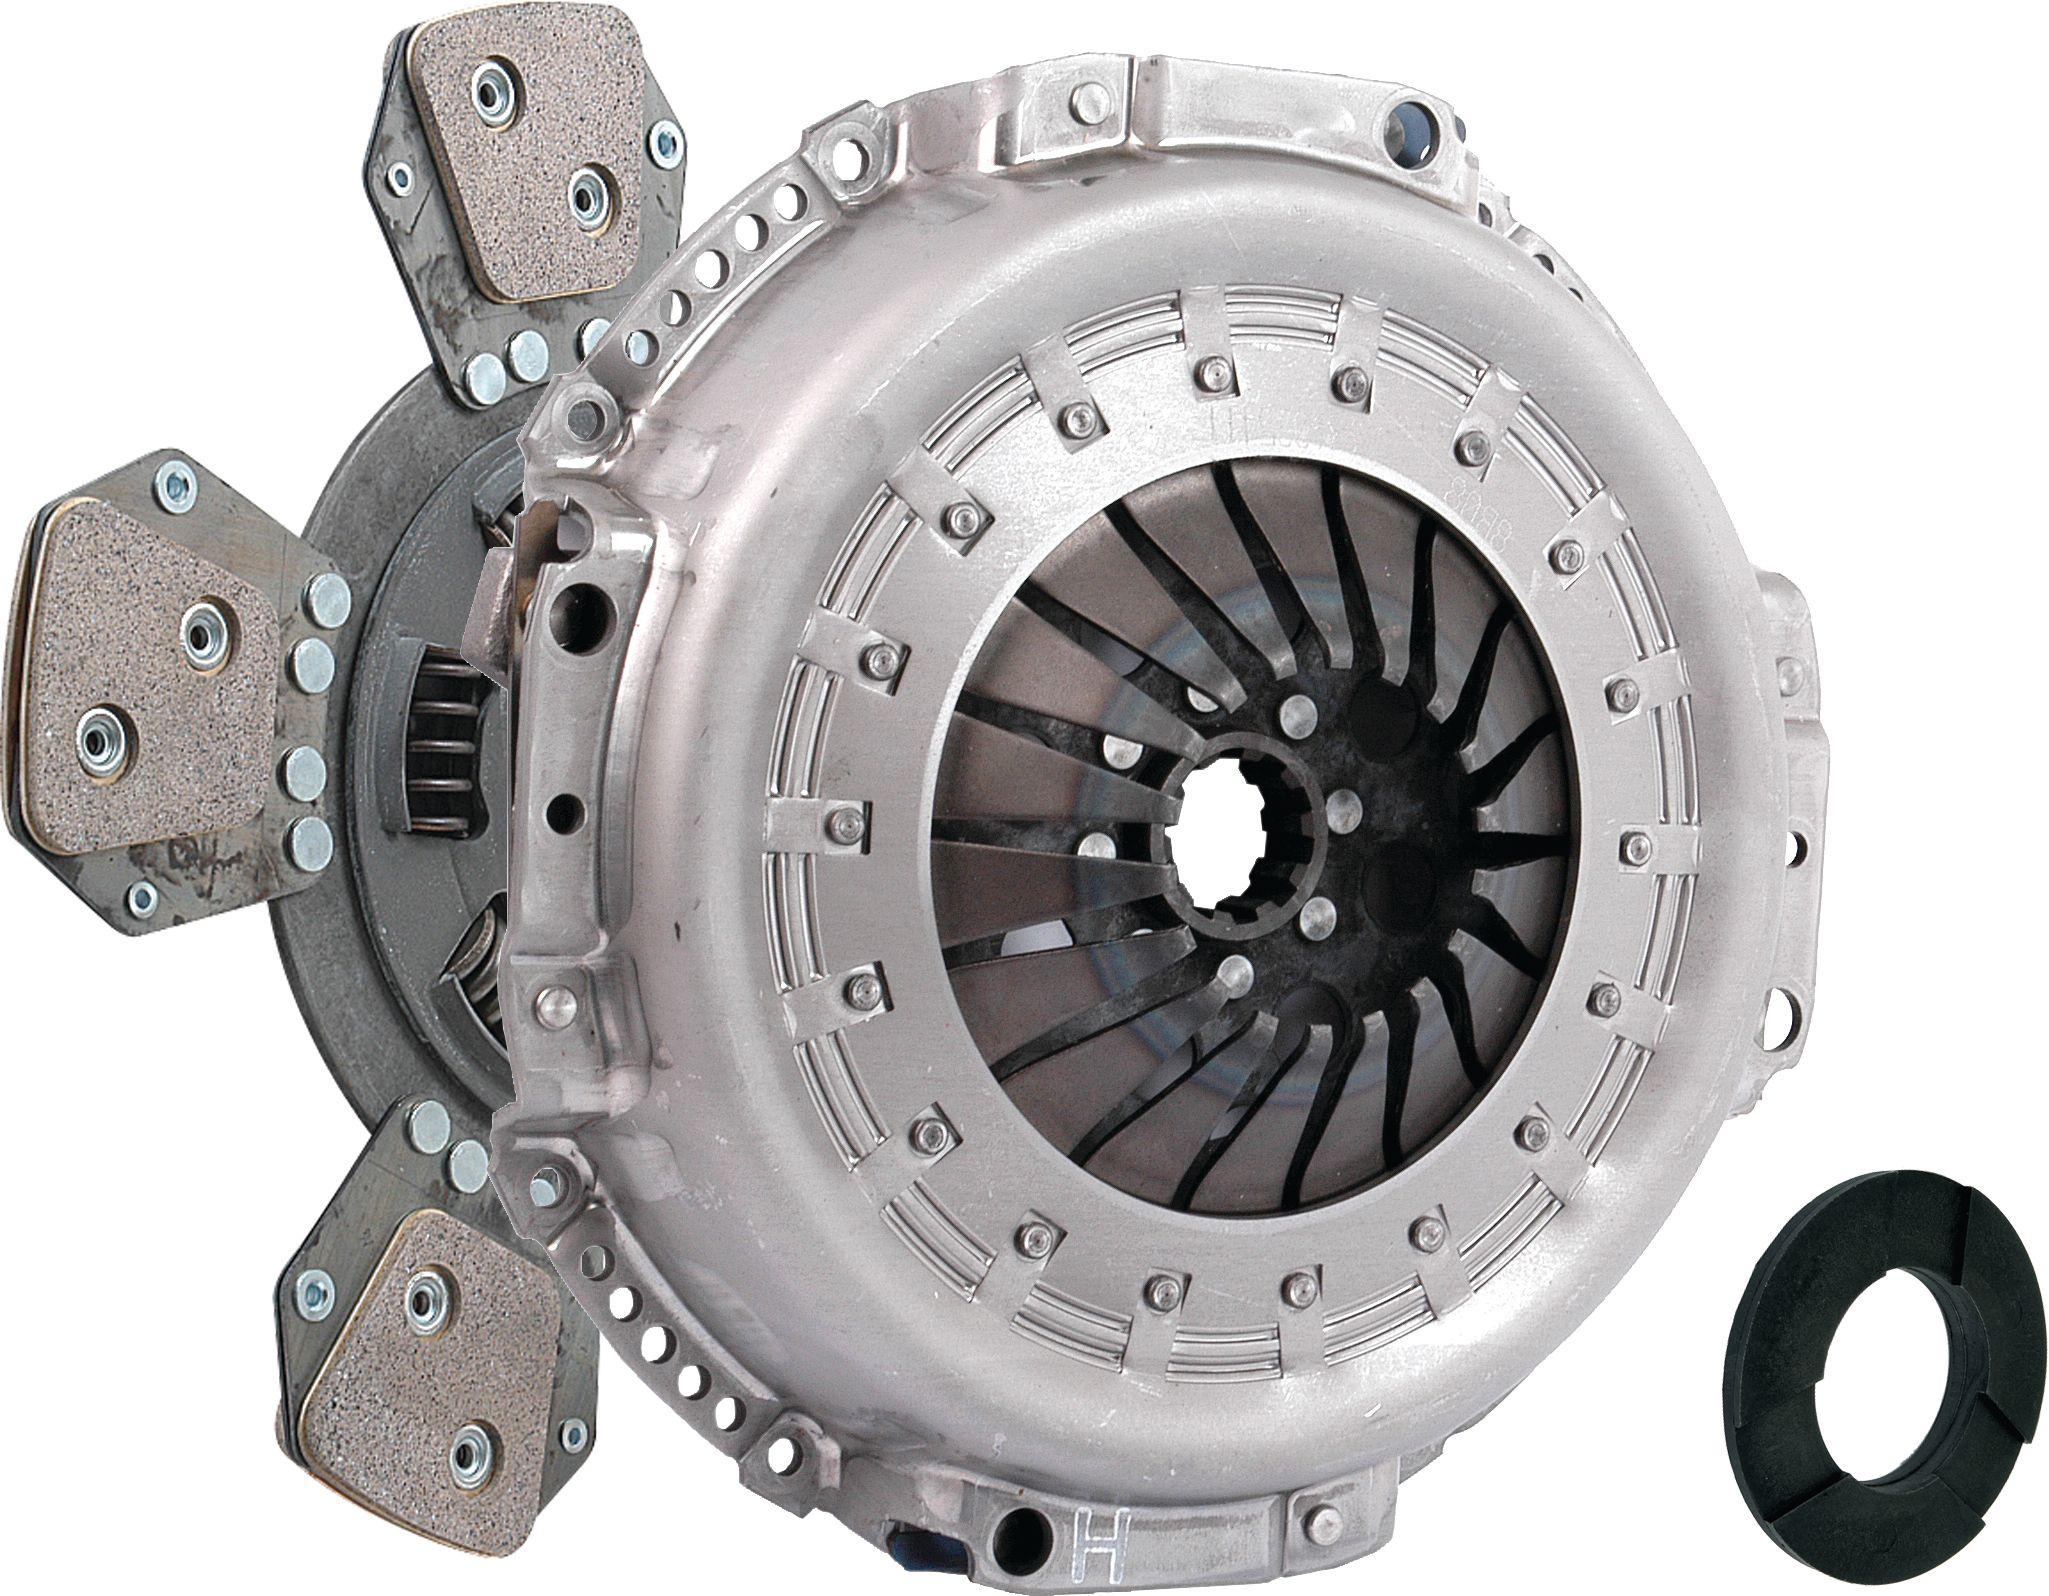 CASE IH CLUTCH KIT WITHOUT BEARINGS 73003